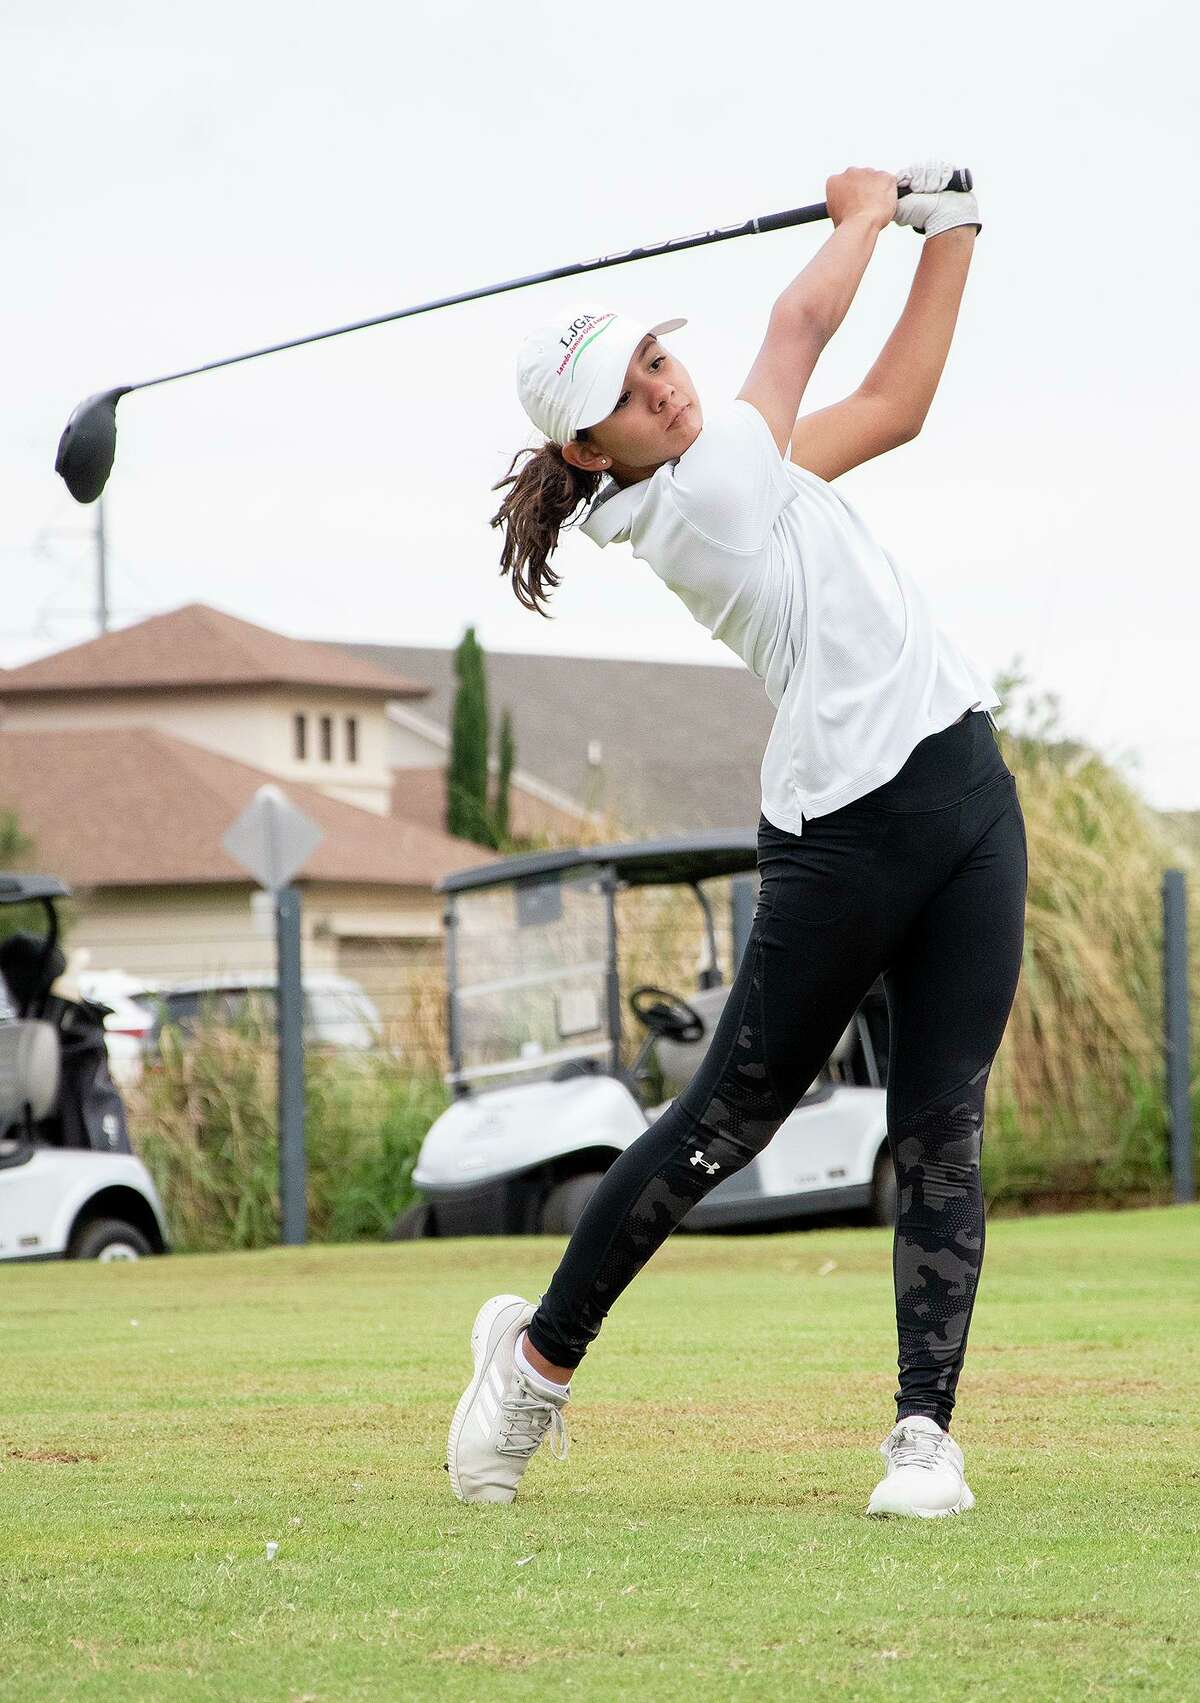 Colonel Santos Benavides Elementary School student and golfer Alyssa Esparza practices at the Laredo Country Club driving range on Wednesday, May 12, 2021.